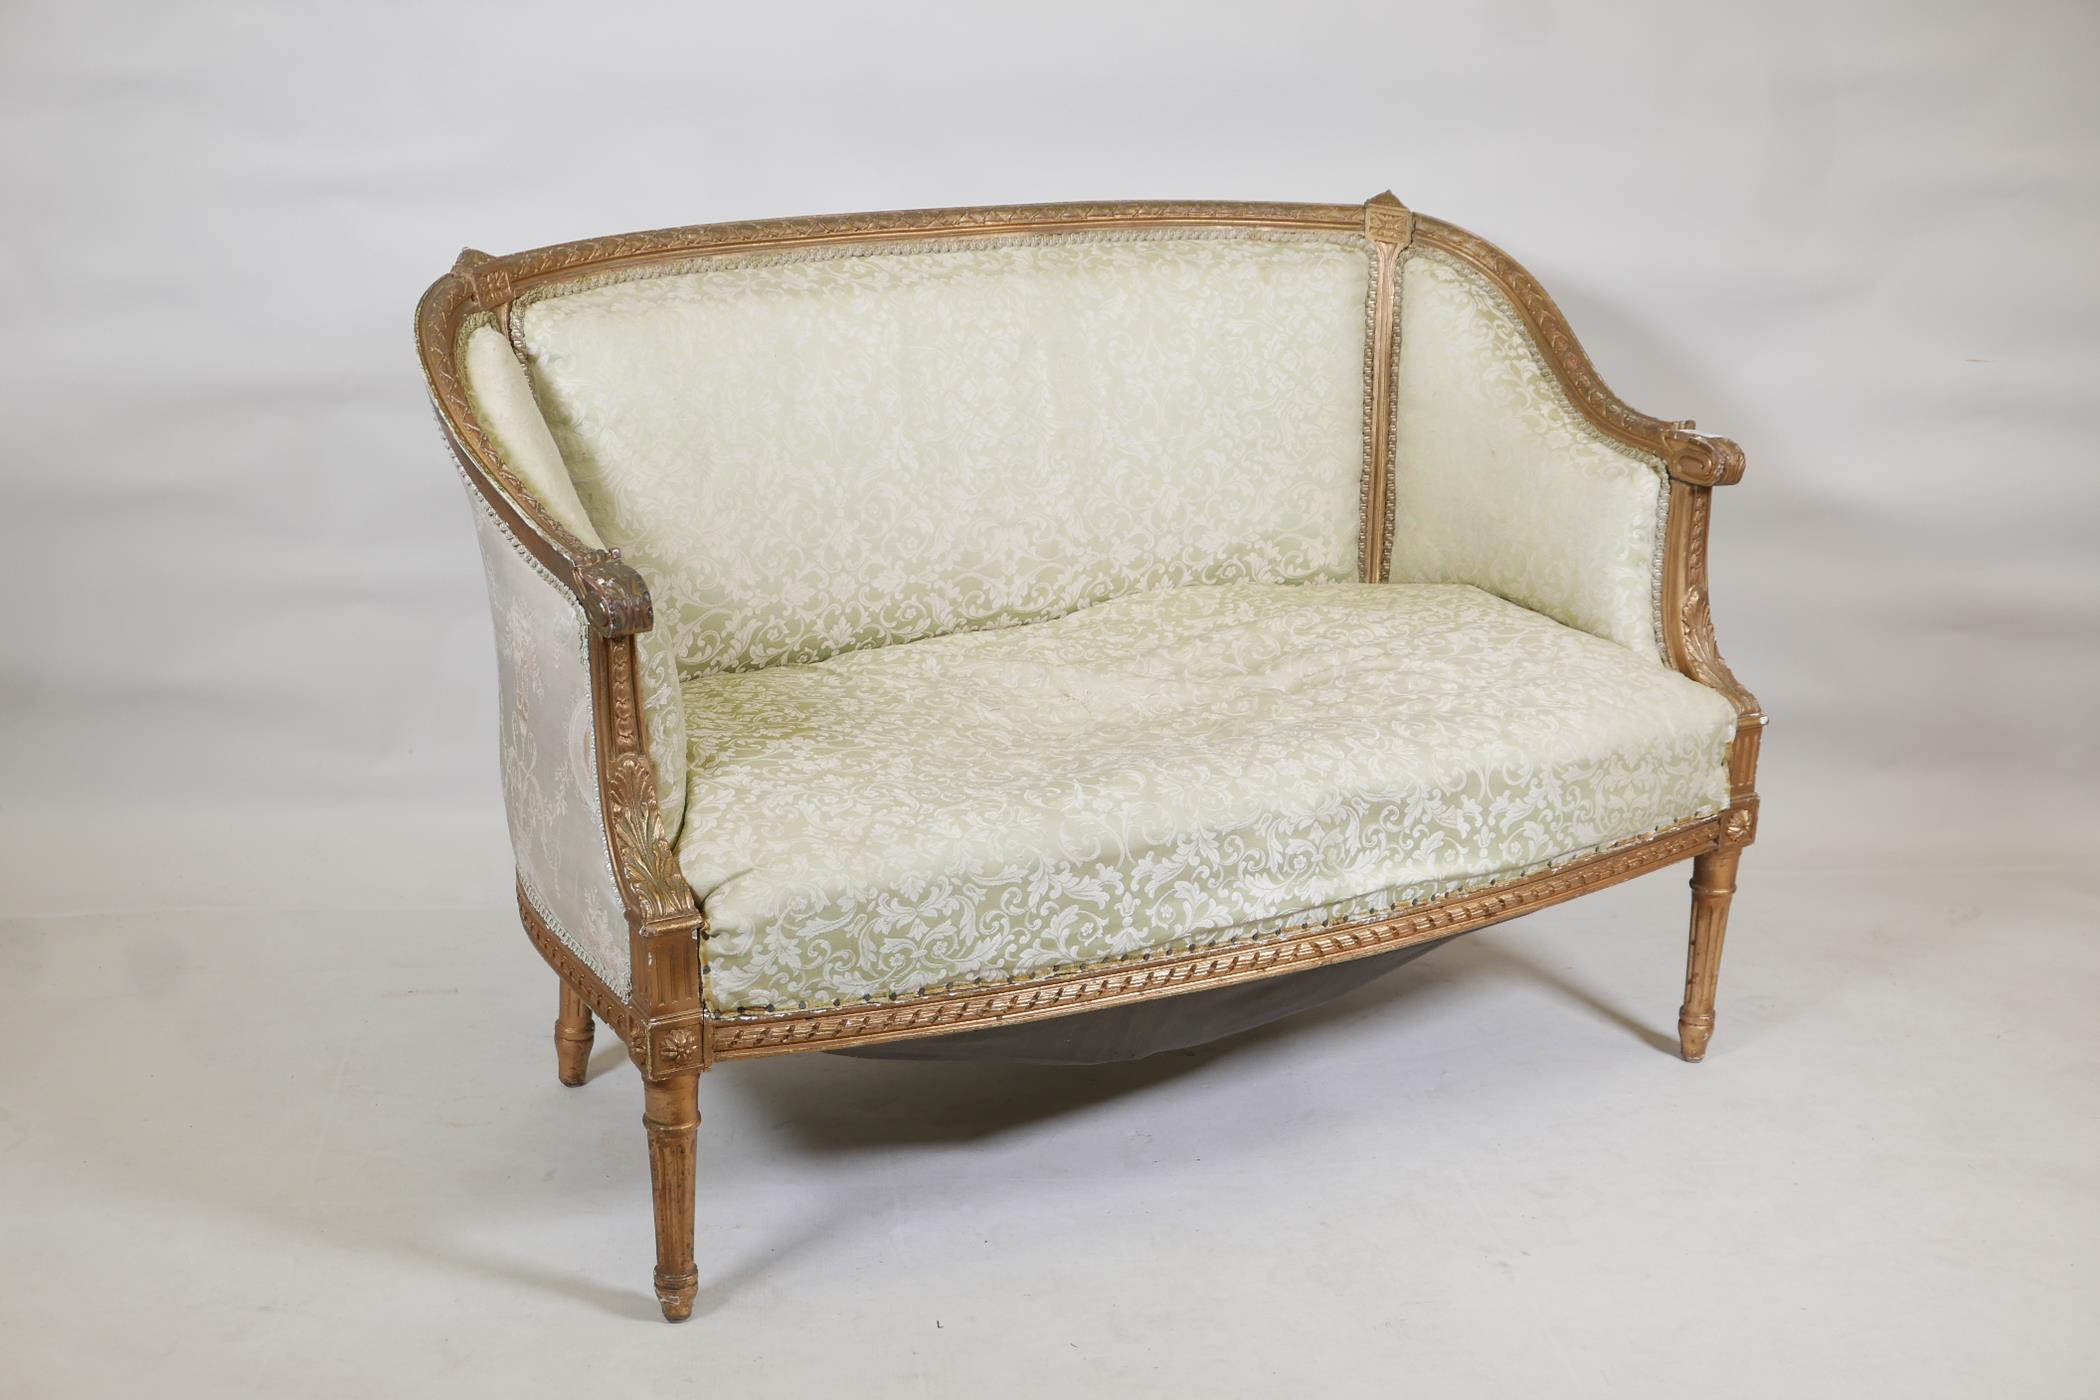 An early C20th giltwood canape, with moulded decoration, raised on fluted supports, 45" wide - Image 2 of 4